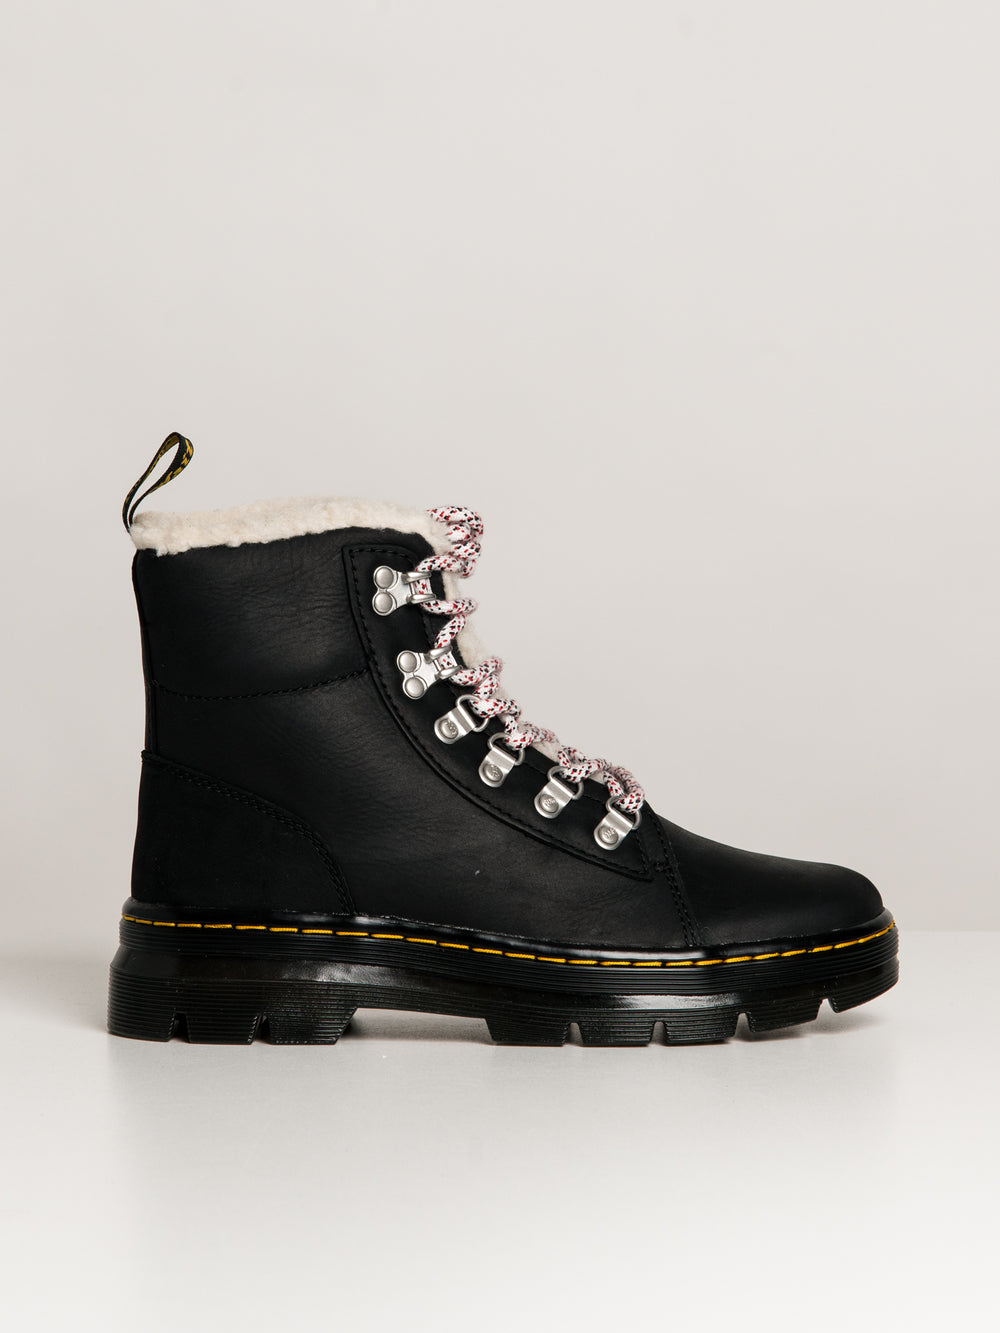 WOMENS DR MARTENS COMBS WYOMING BOOT